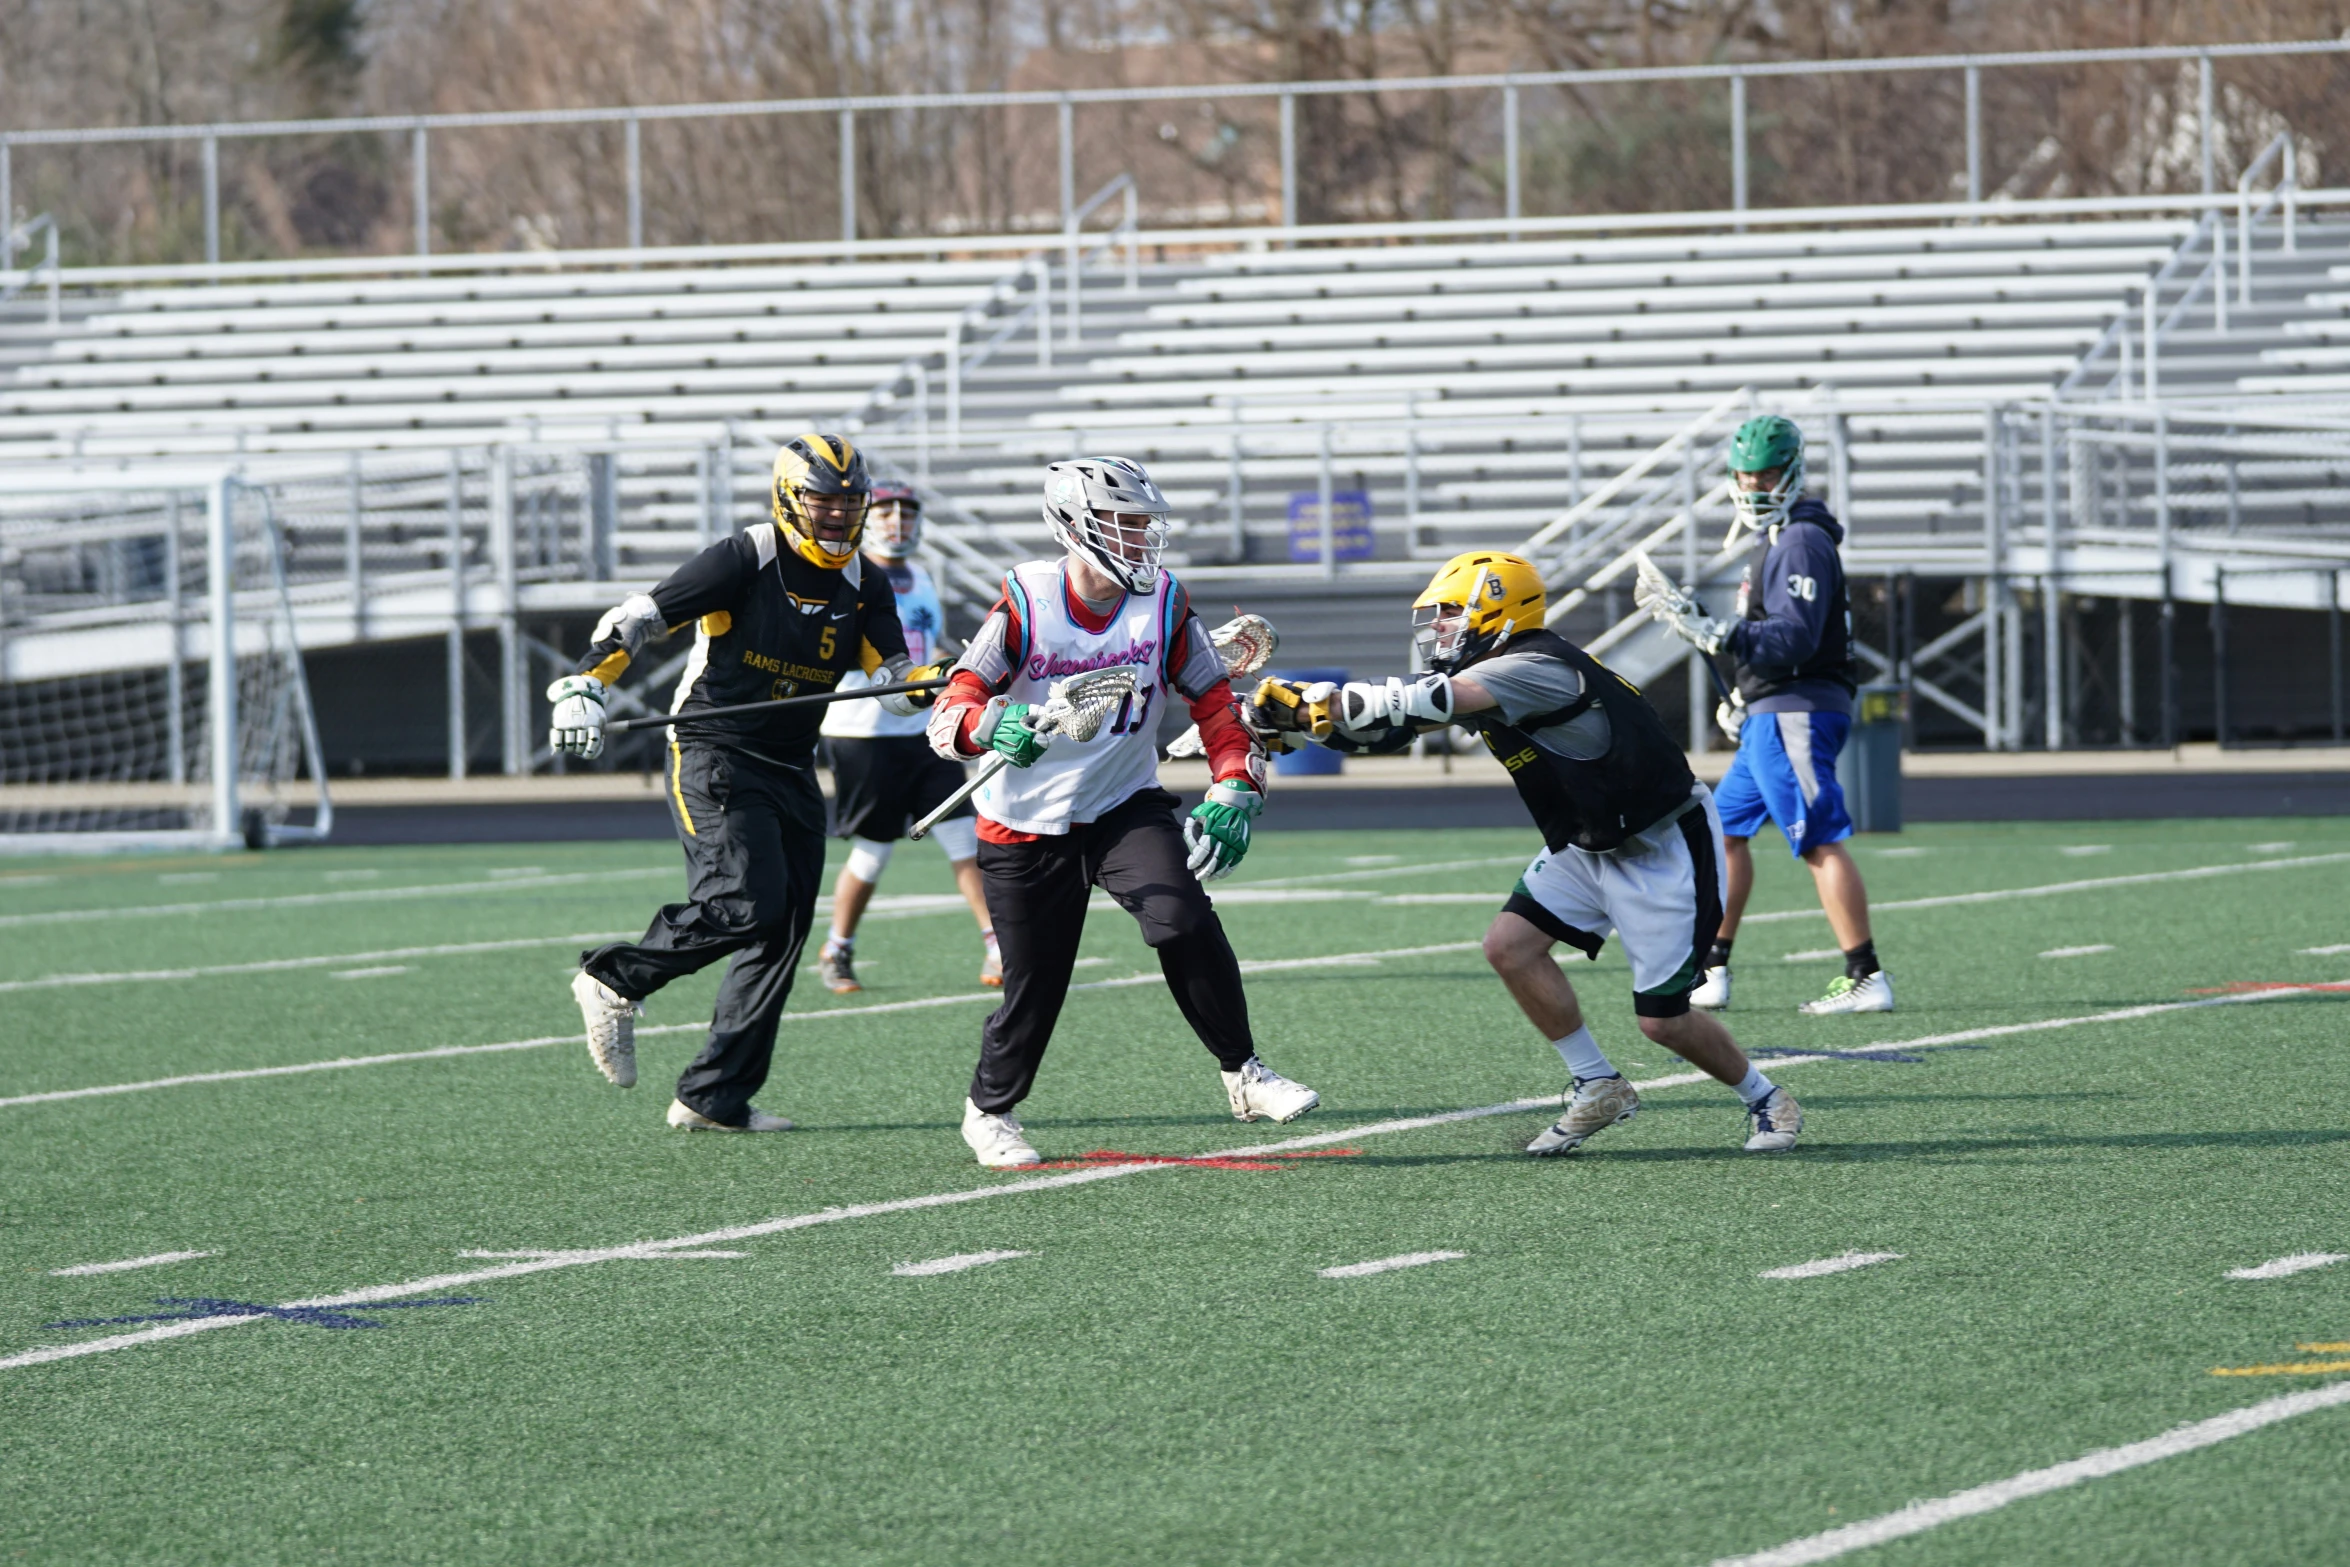 lacrosse teams running on a field with an athletic stadium behind